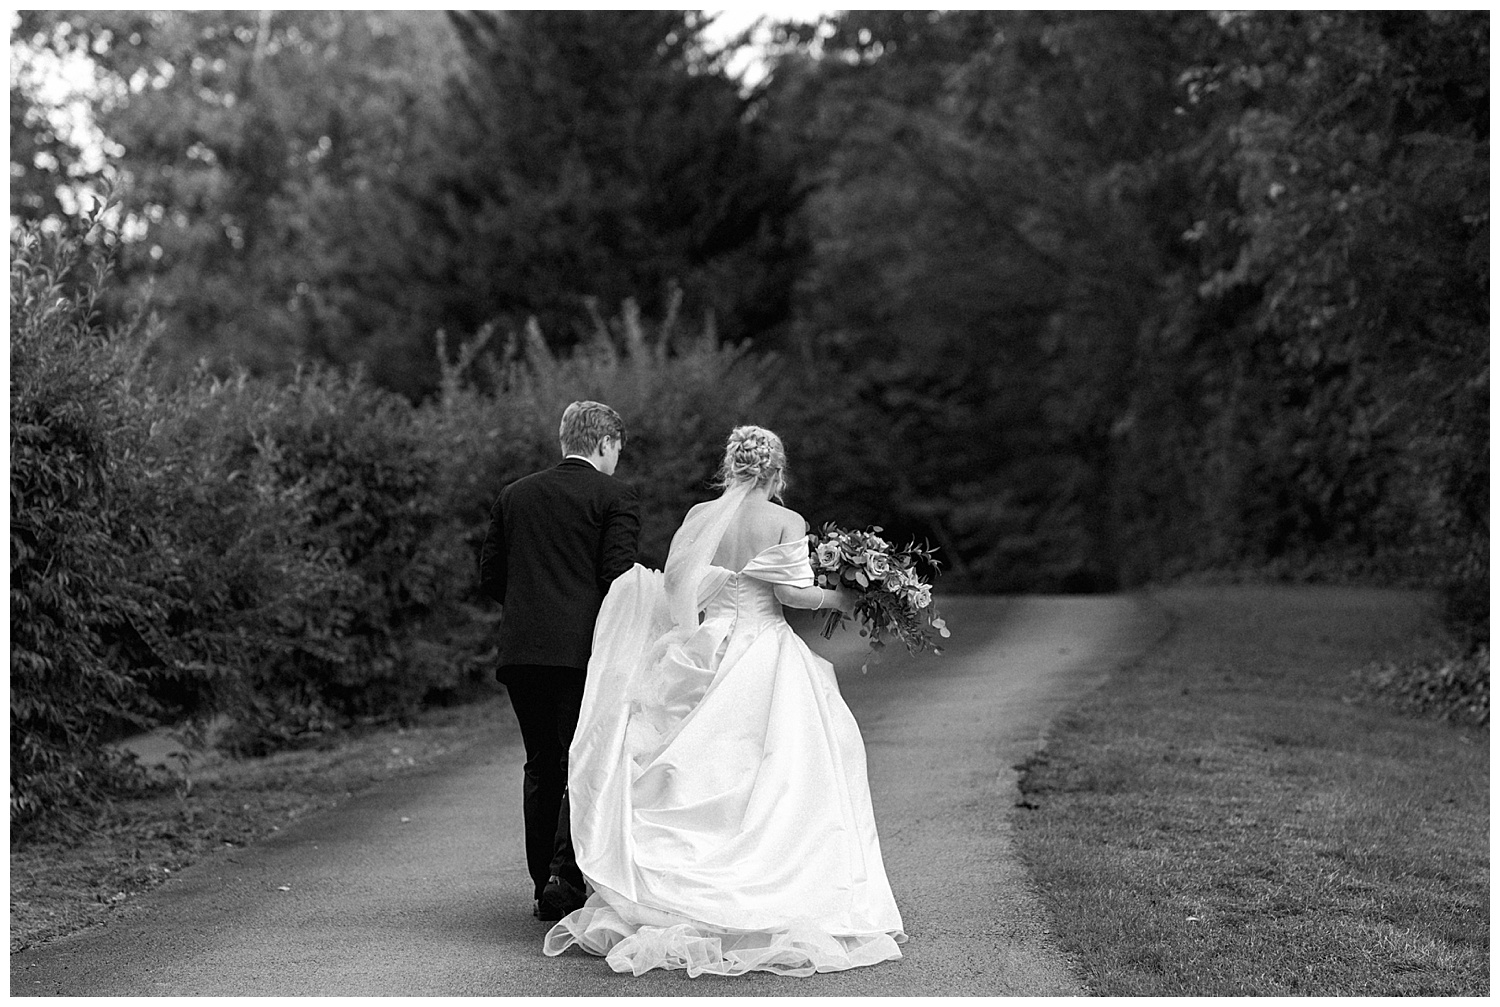 Hannah and Harrison's wedding day in black and white